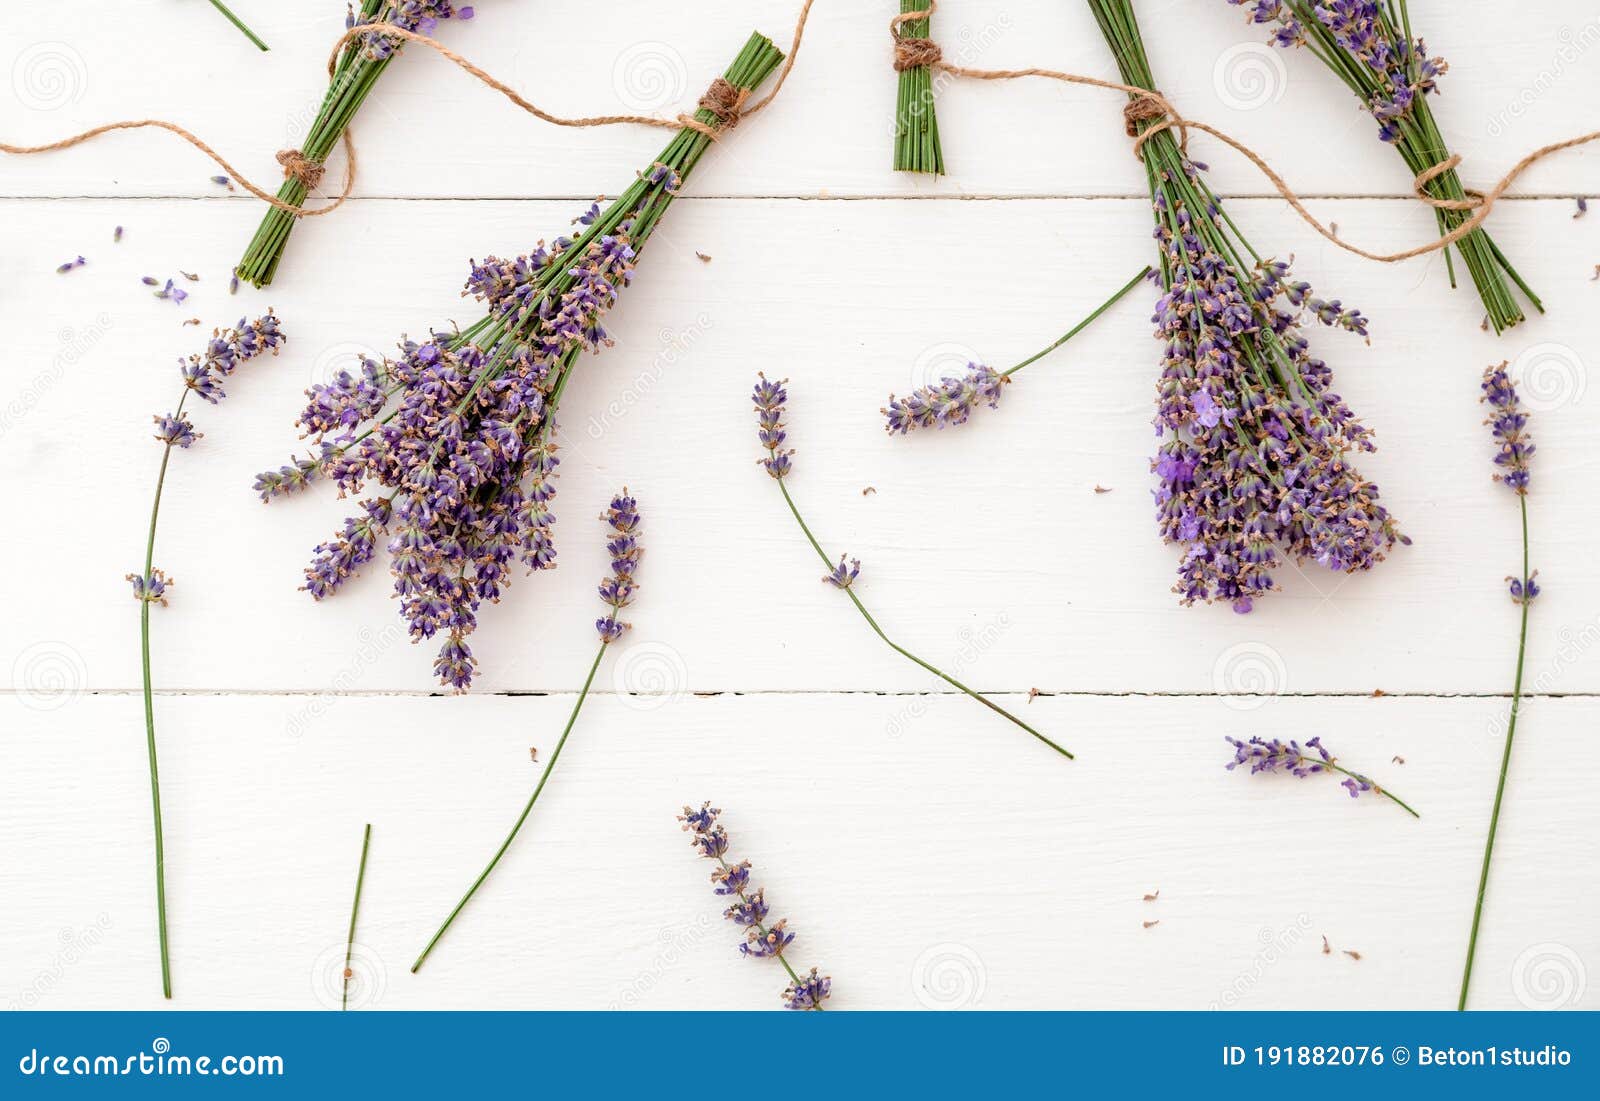 fresh lavender flowers and bouquets are dried on white wooden background. bunches of lavender flowers dry. apothecary herbs for